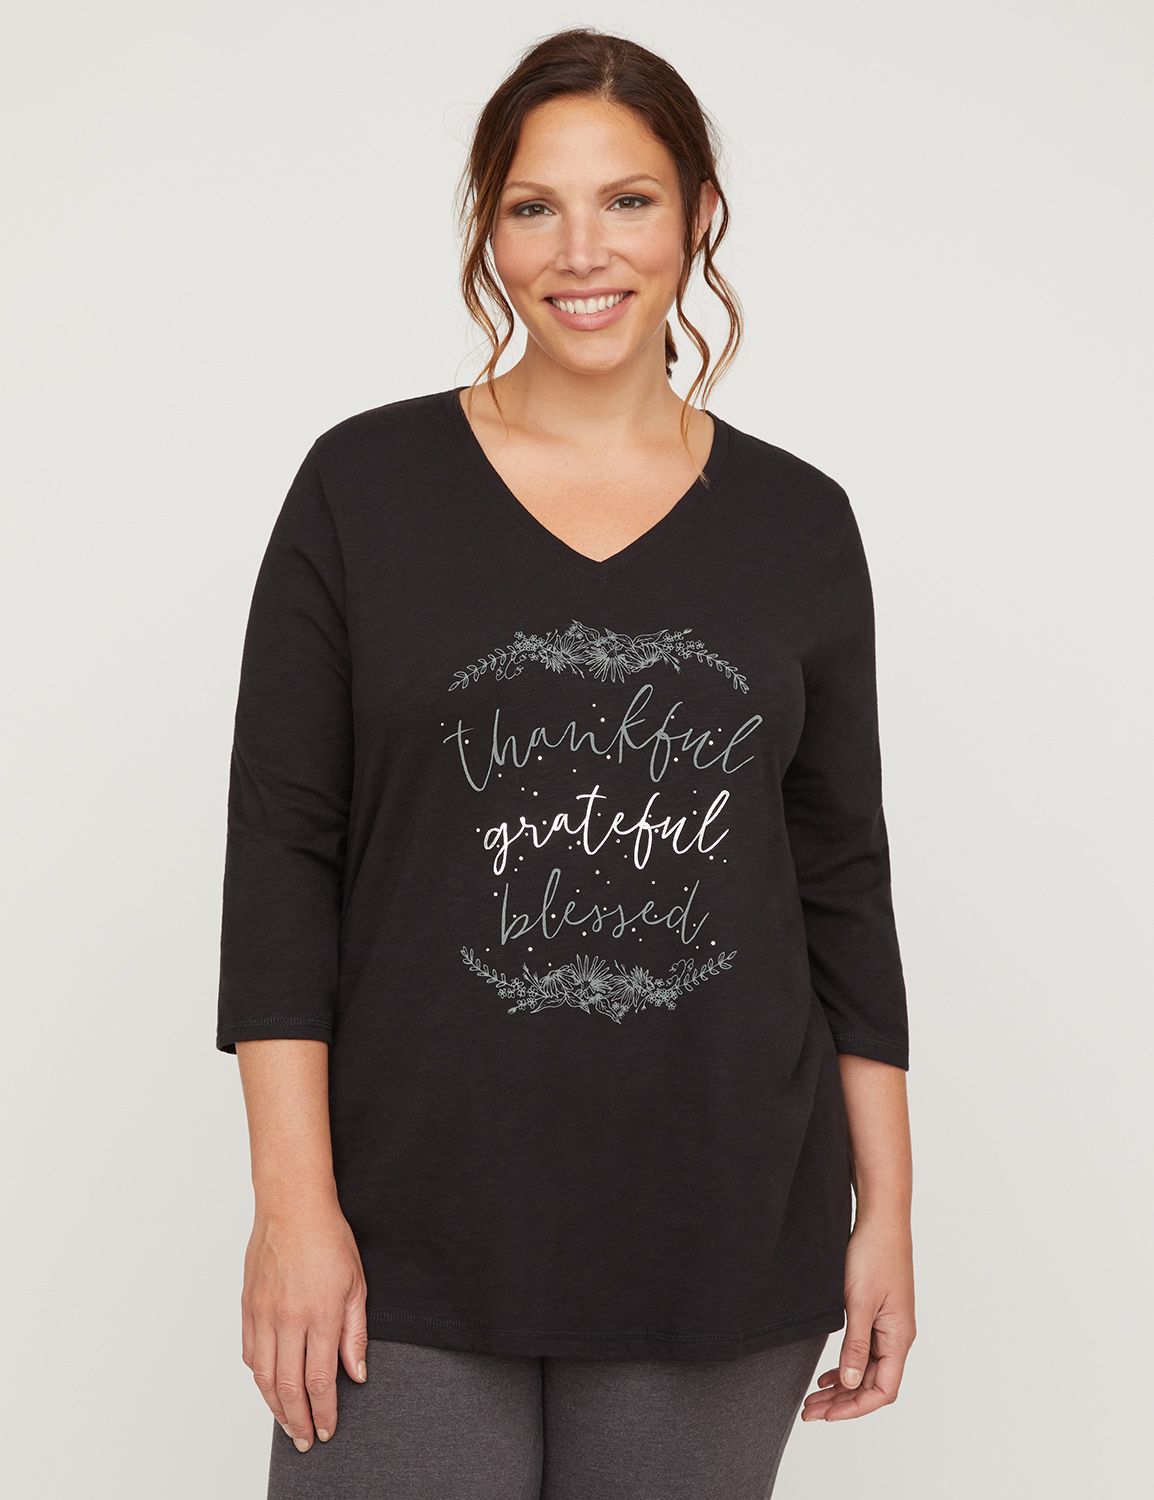 On-the-go comfort! An active top in slub Cotton with a graphic embellished with metallic and sparkle. V-neck. Three-quarter sleeves. Item Number #316070, 50% Cotton/50% Polyester Slub Jersey, Machine Wash, Imported Plus Size Activewear, Length: 30" , Plus Sizes 0X-5X, Petite Plus Sizes 0XWP-3XWP, Catherines Plus Sizes